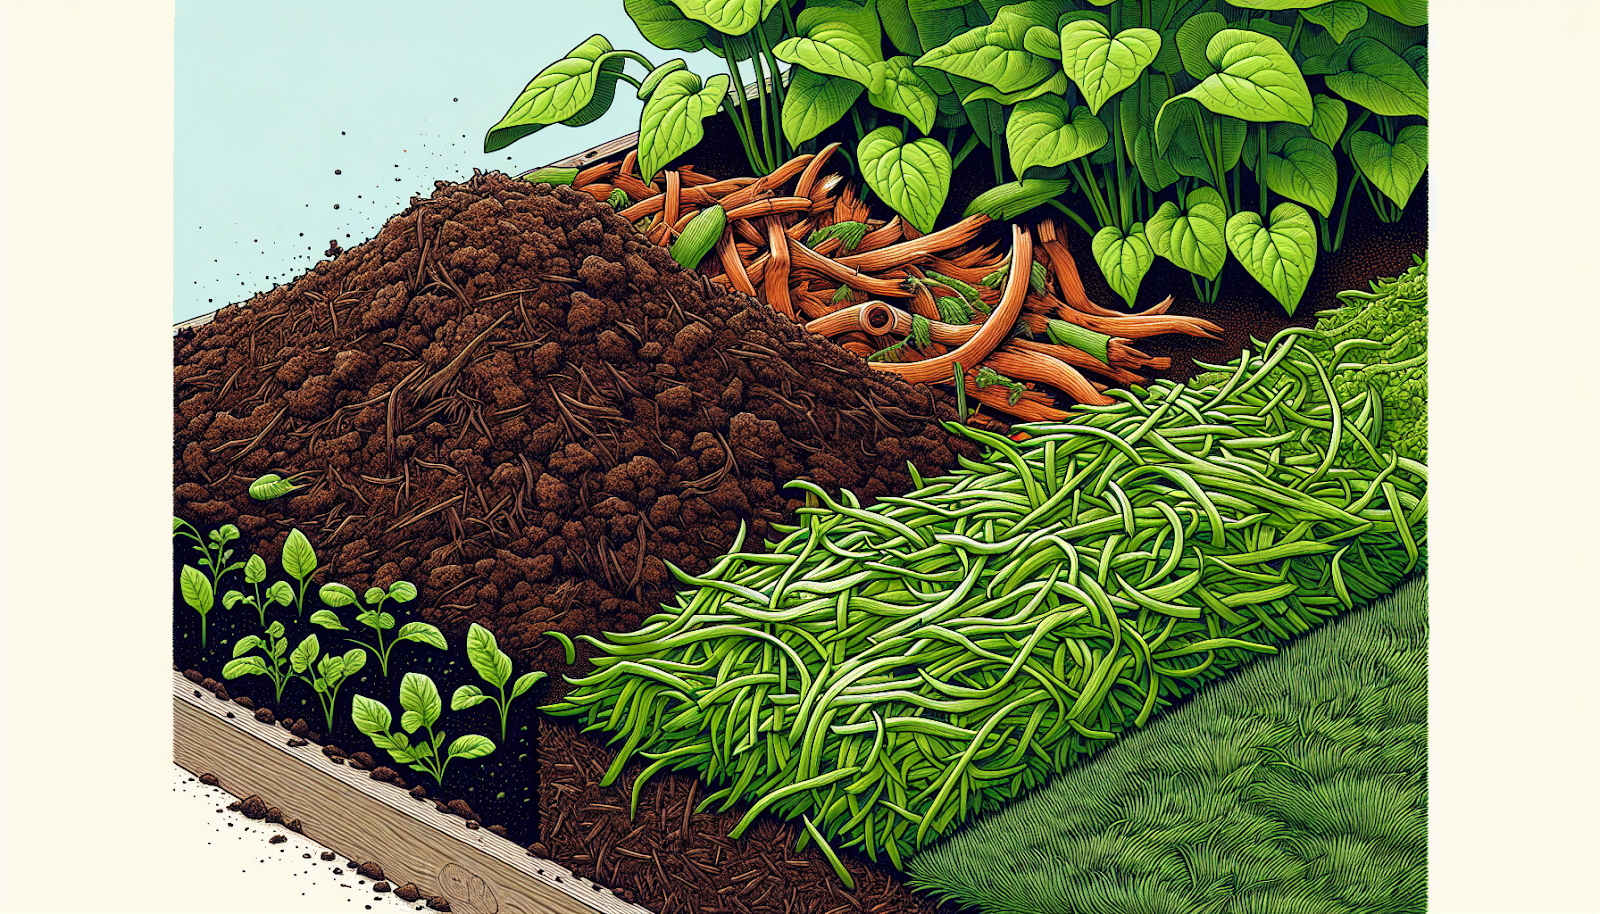 Illustration of compost and grass clippings in a garden